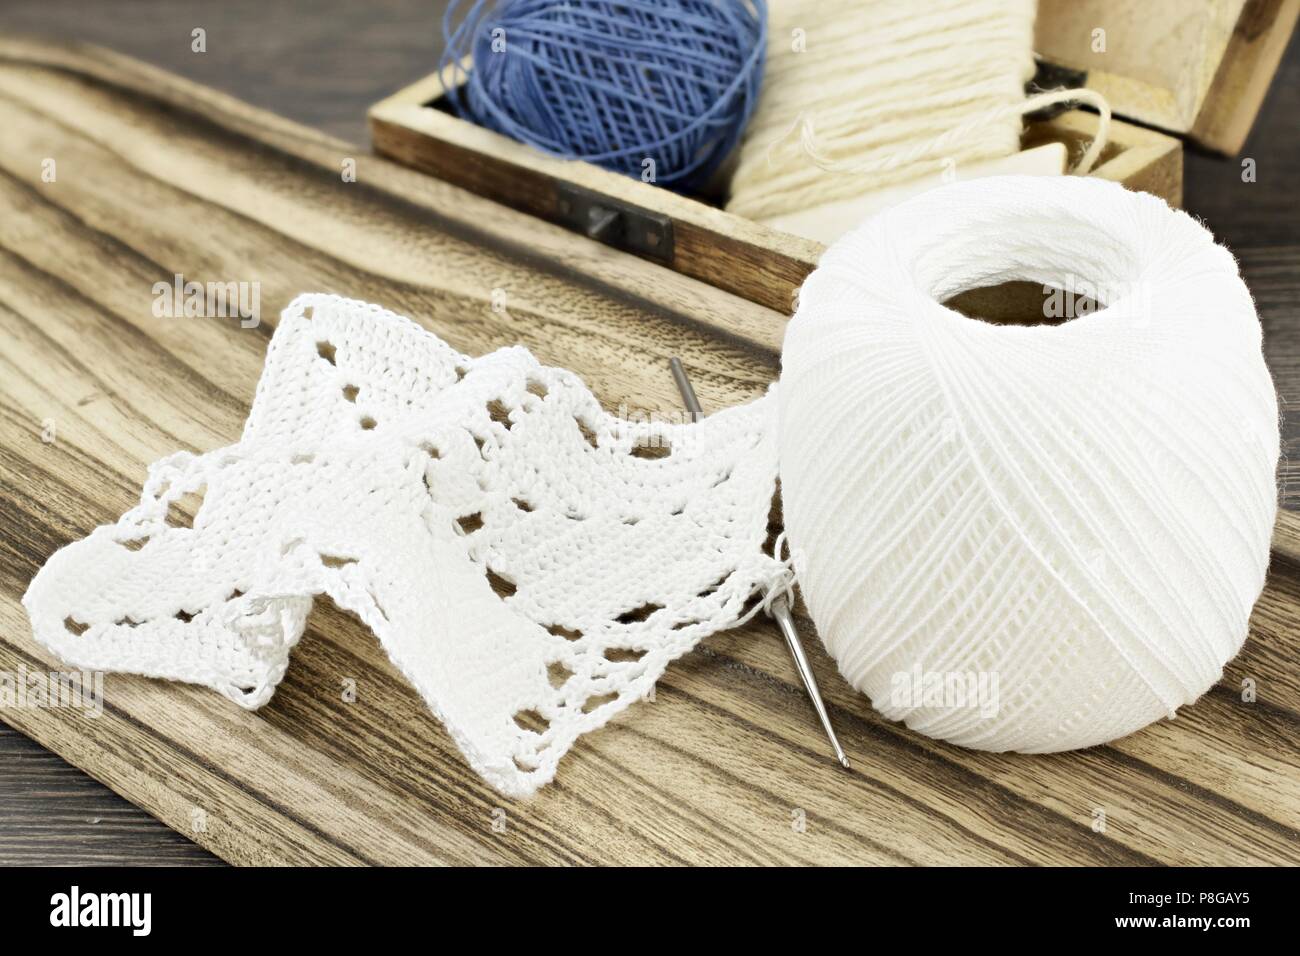 Still life with crochet doily and white yarn Stock Photo